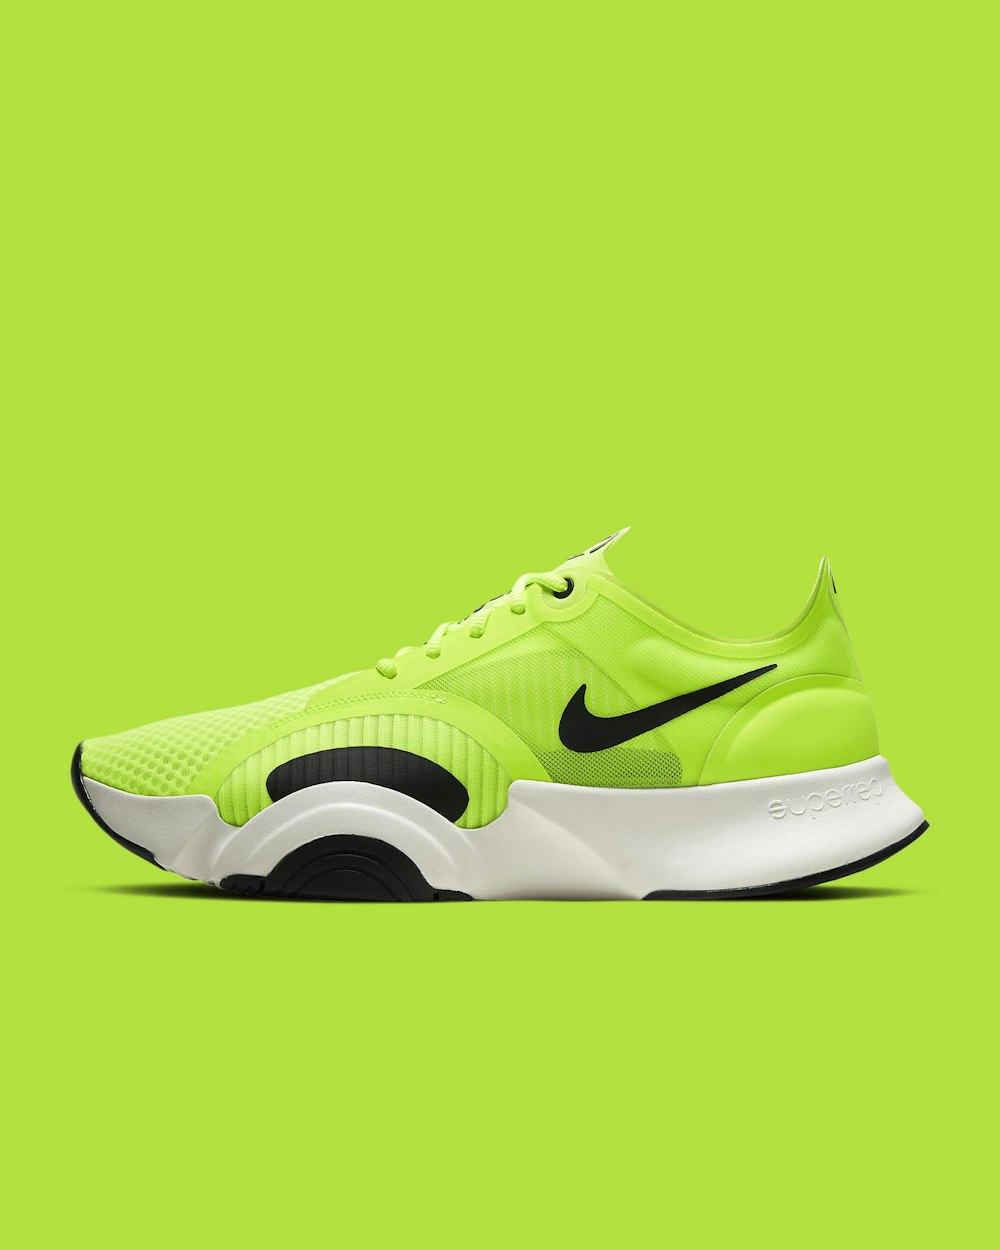 Nike Shoe Pictures Hd Download Free Images On Unsplash